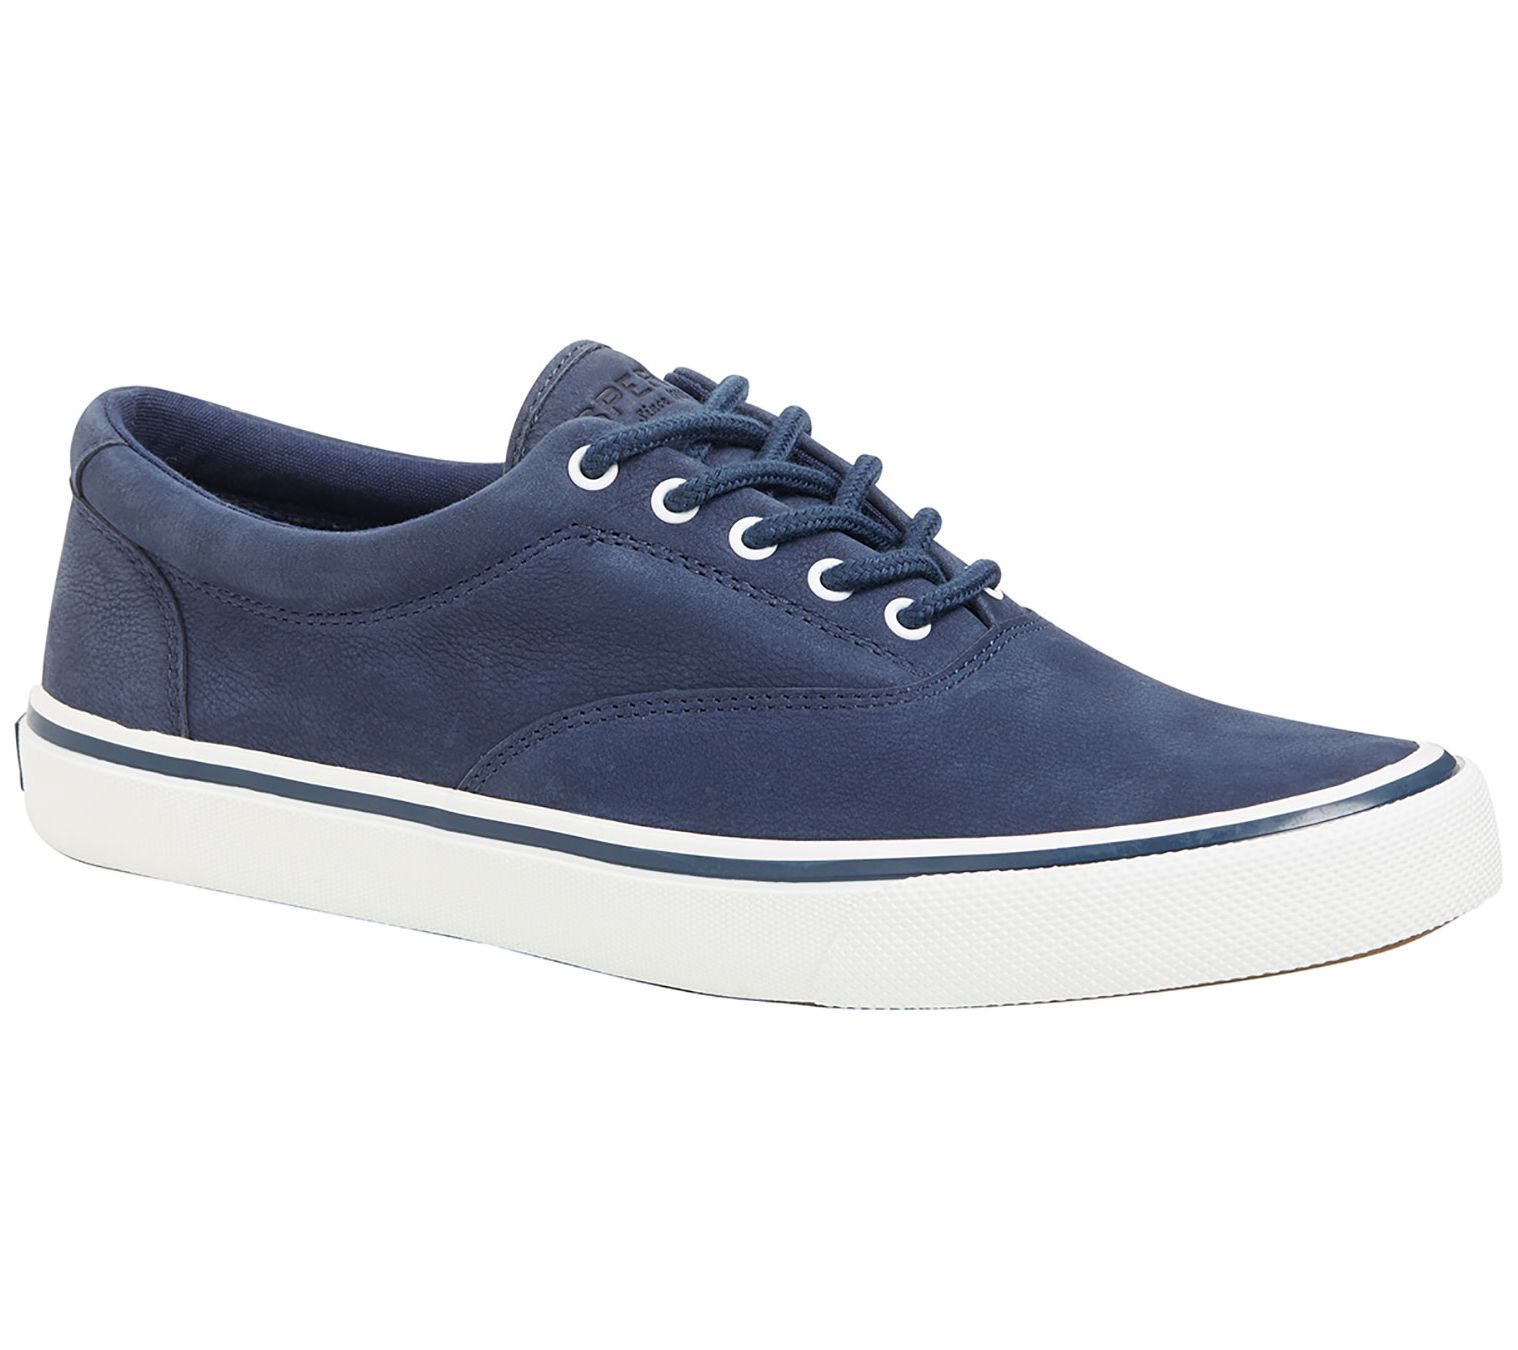 Sperry Men's Striper Washable Leather Sneakers - QVC.com